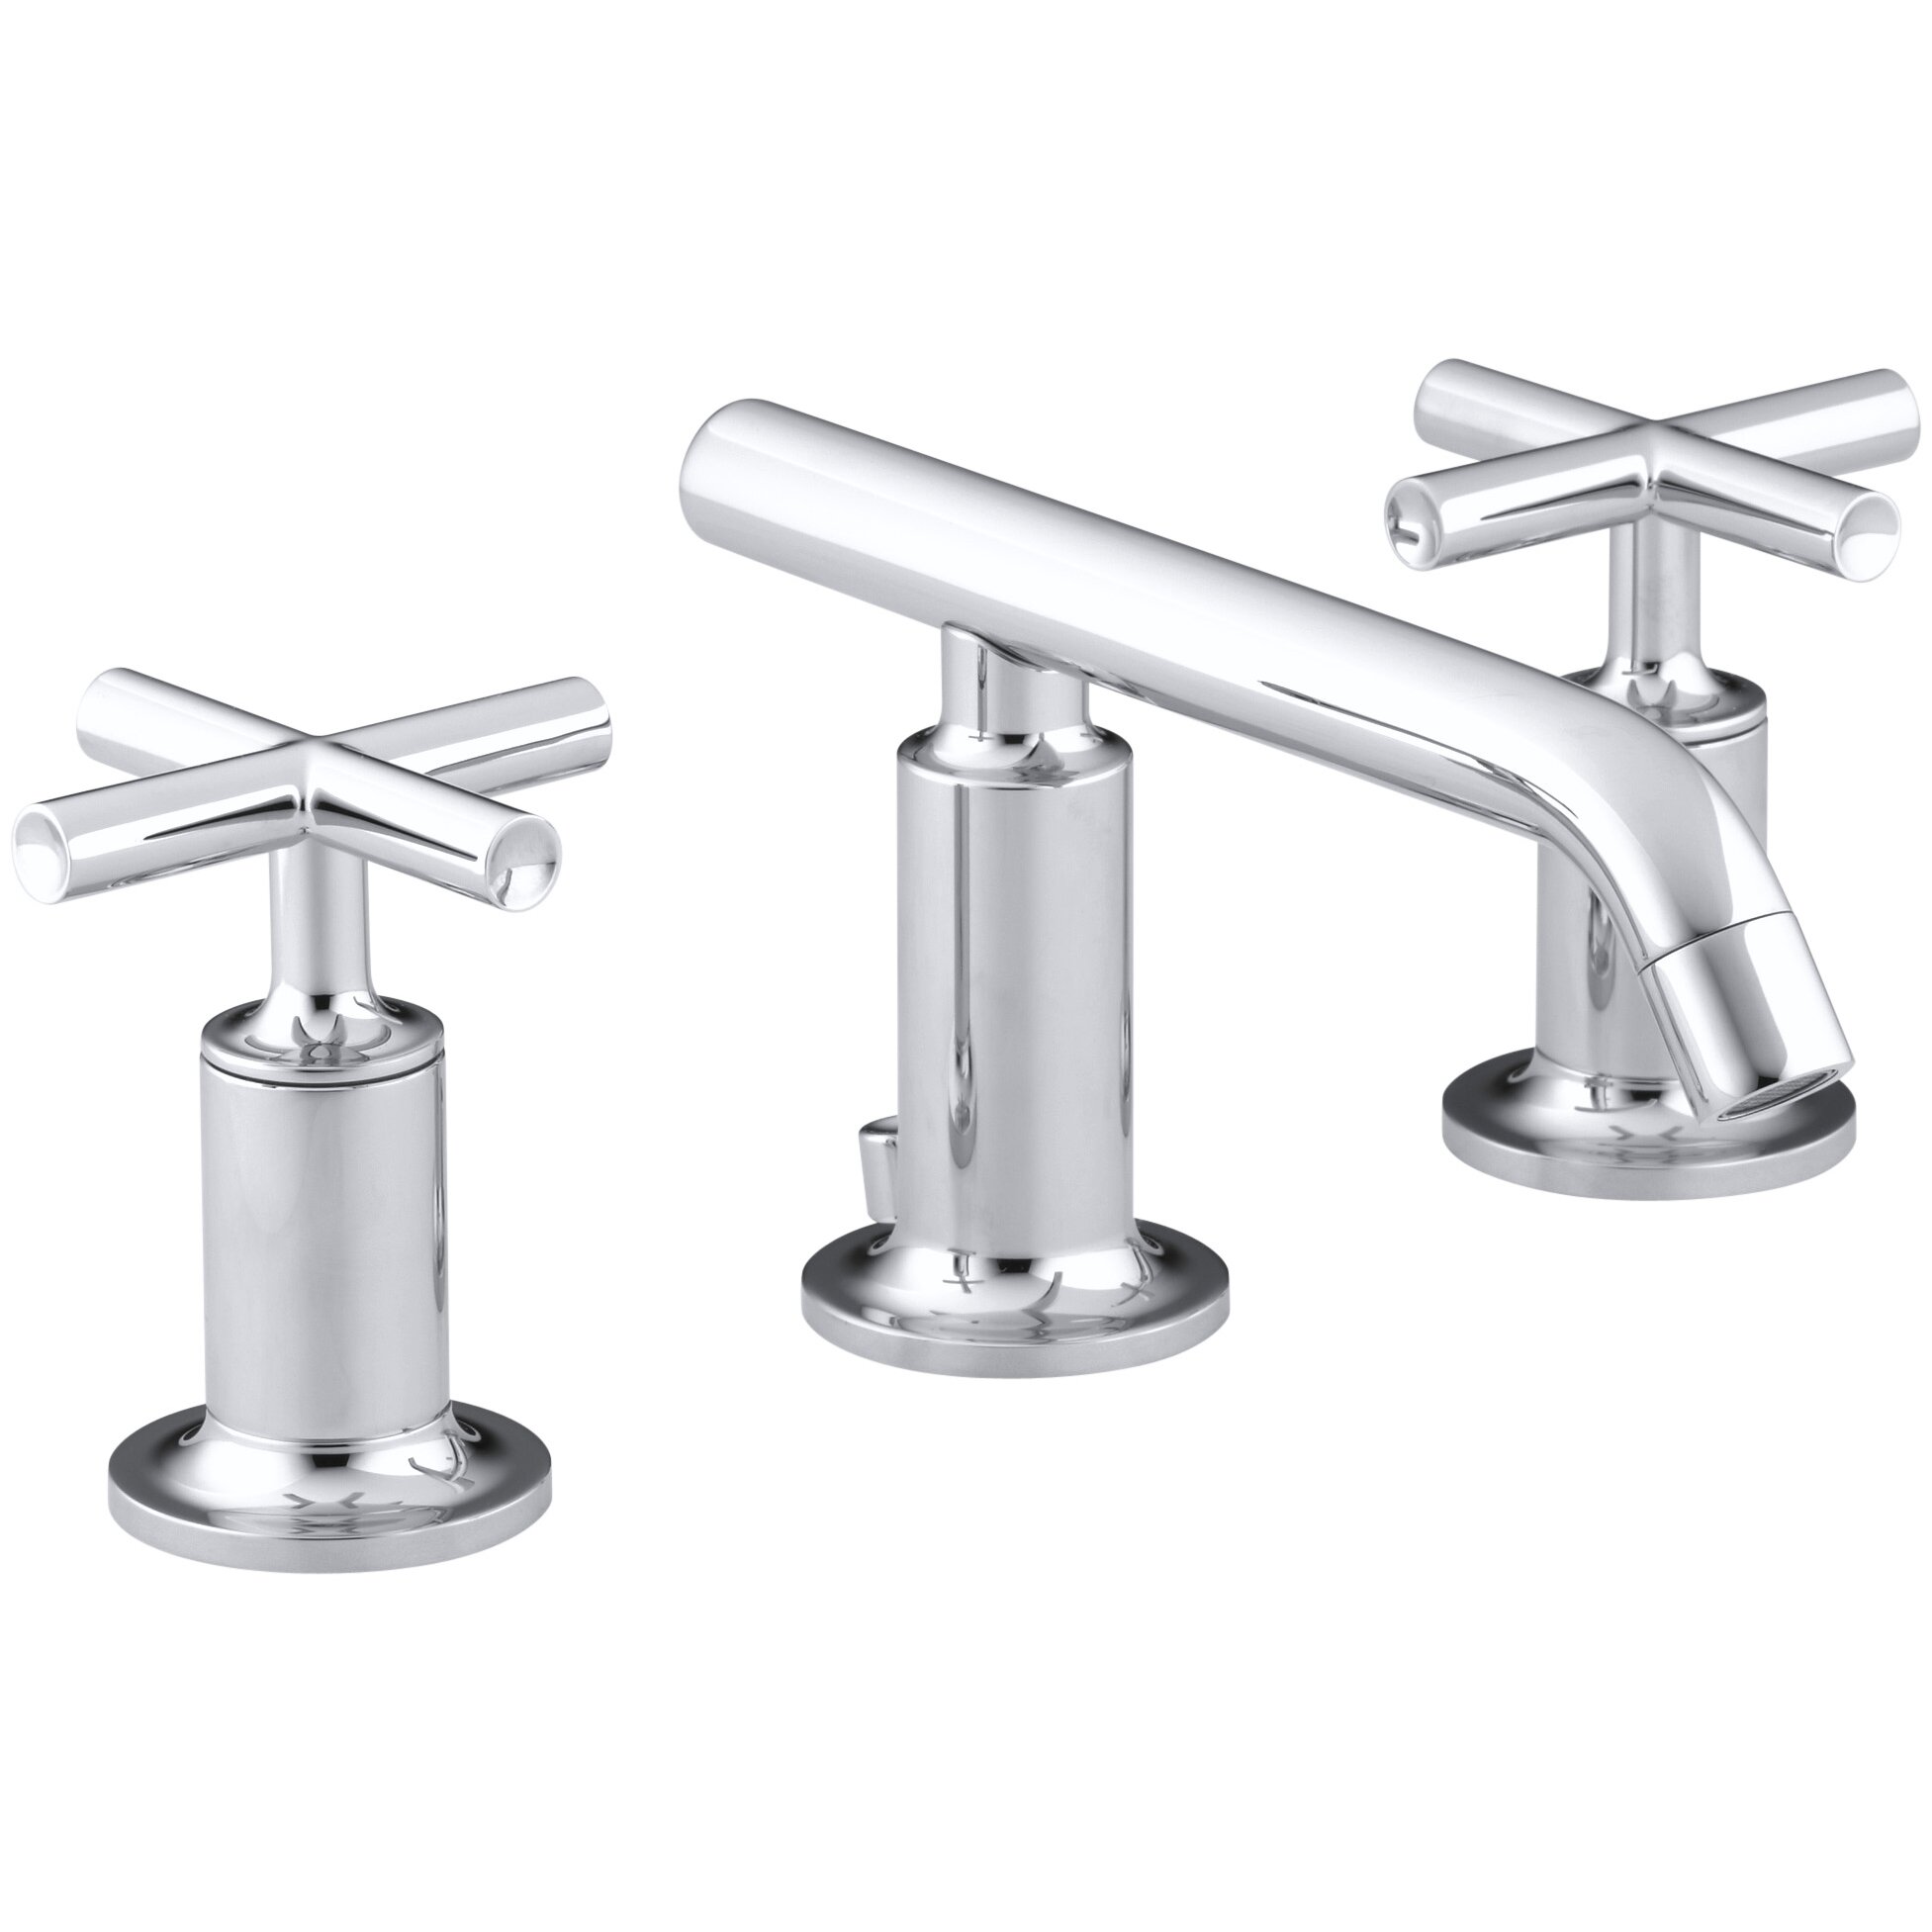 Kohler Purist Widespread Bathroom Sink Faucet with Low ...